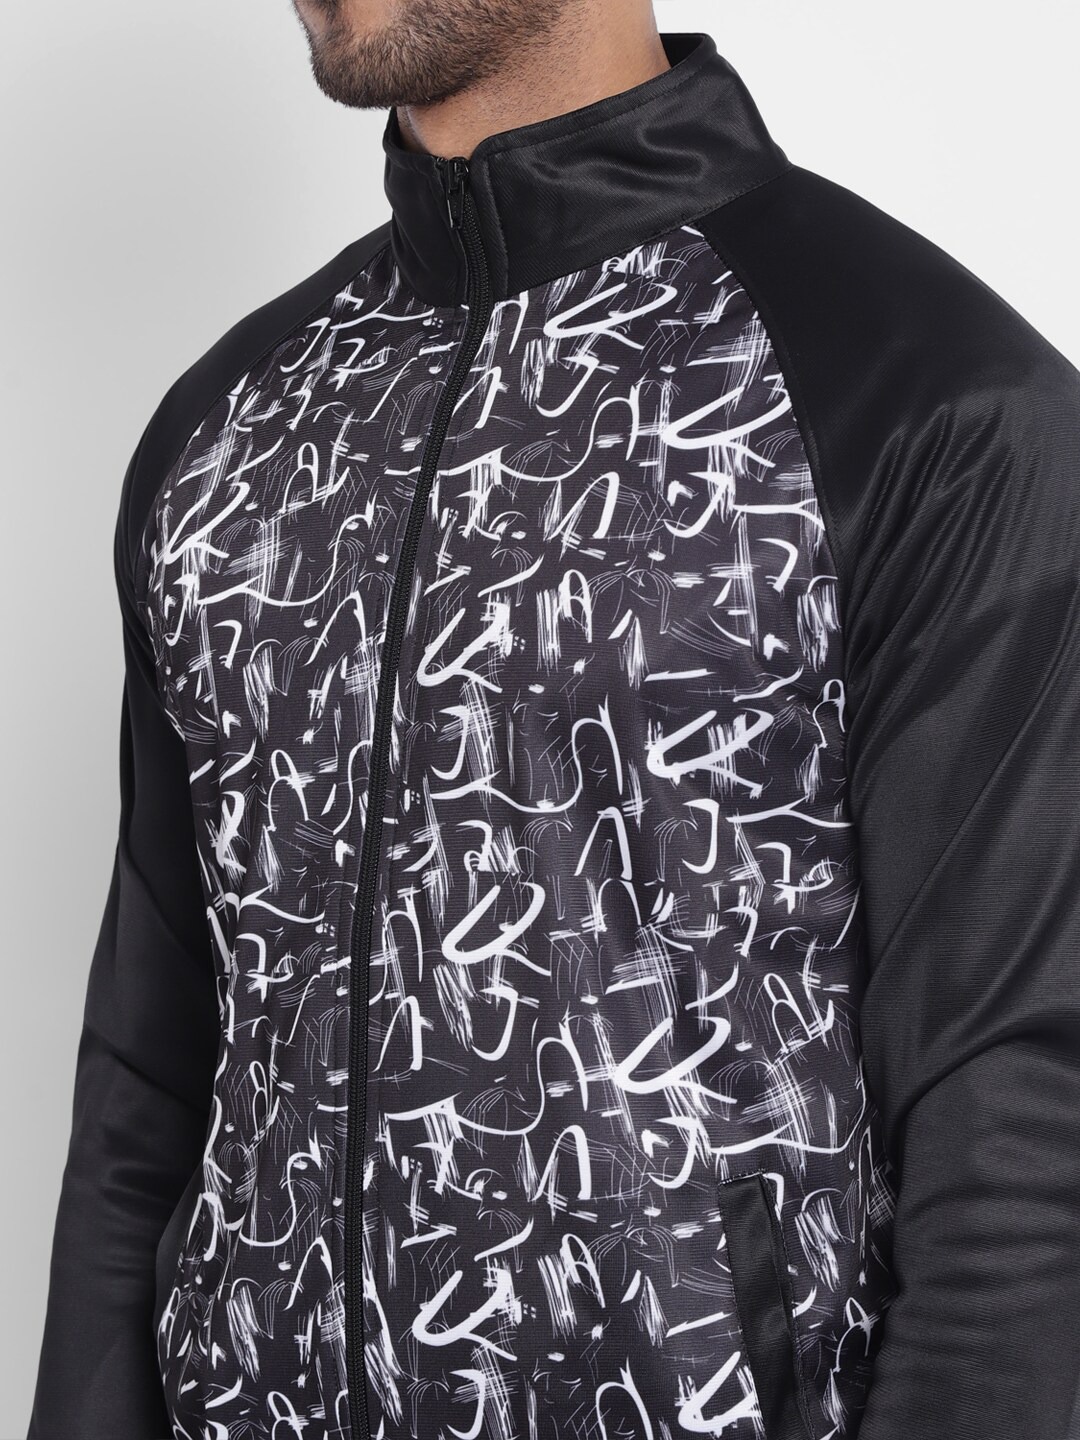 Clothing Tracksuits | OFF LIMITS Men Black Graphic Printed Tracksuits - ZG17654